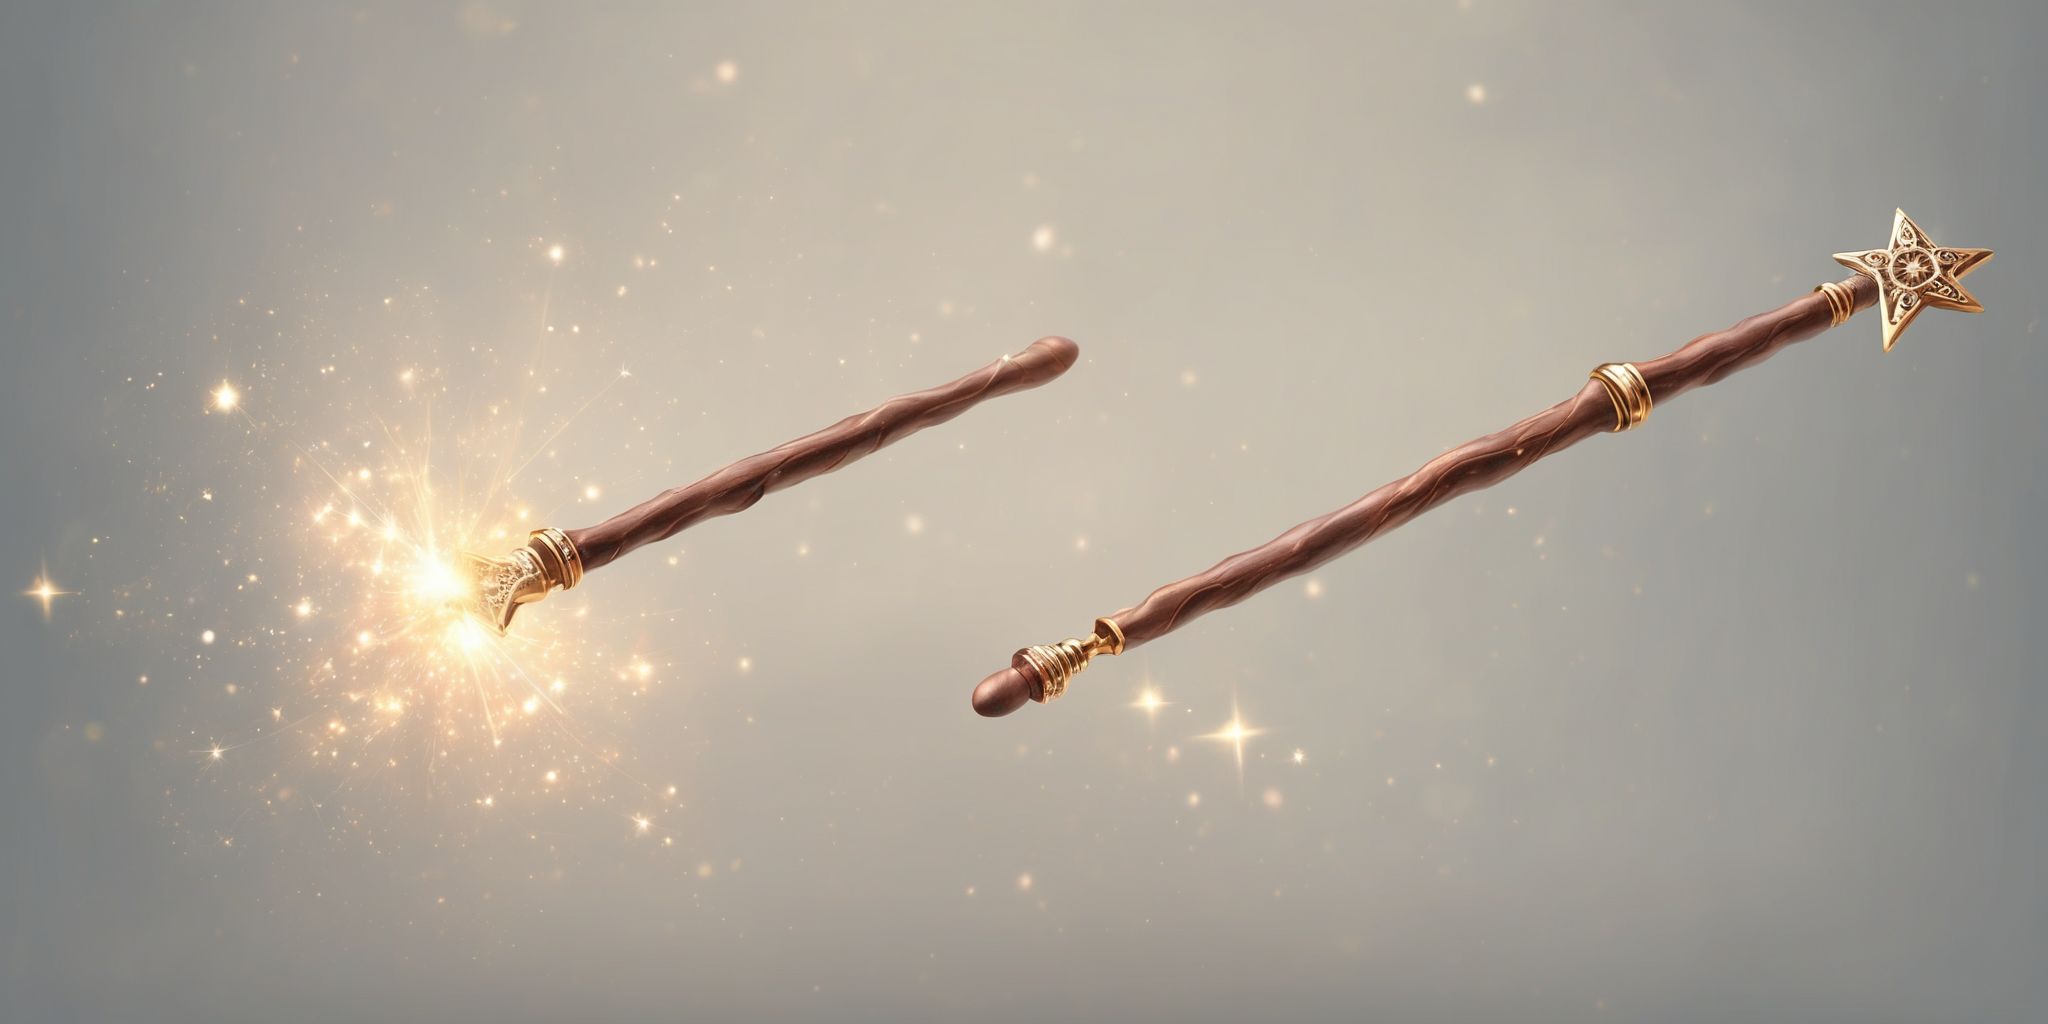 Magic wand  in realistic, photographic style